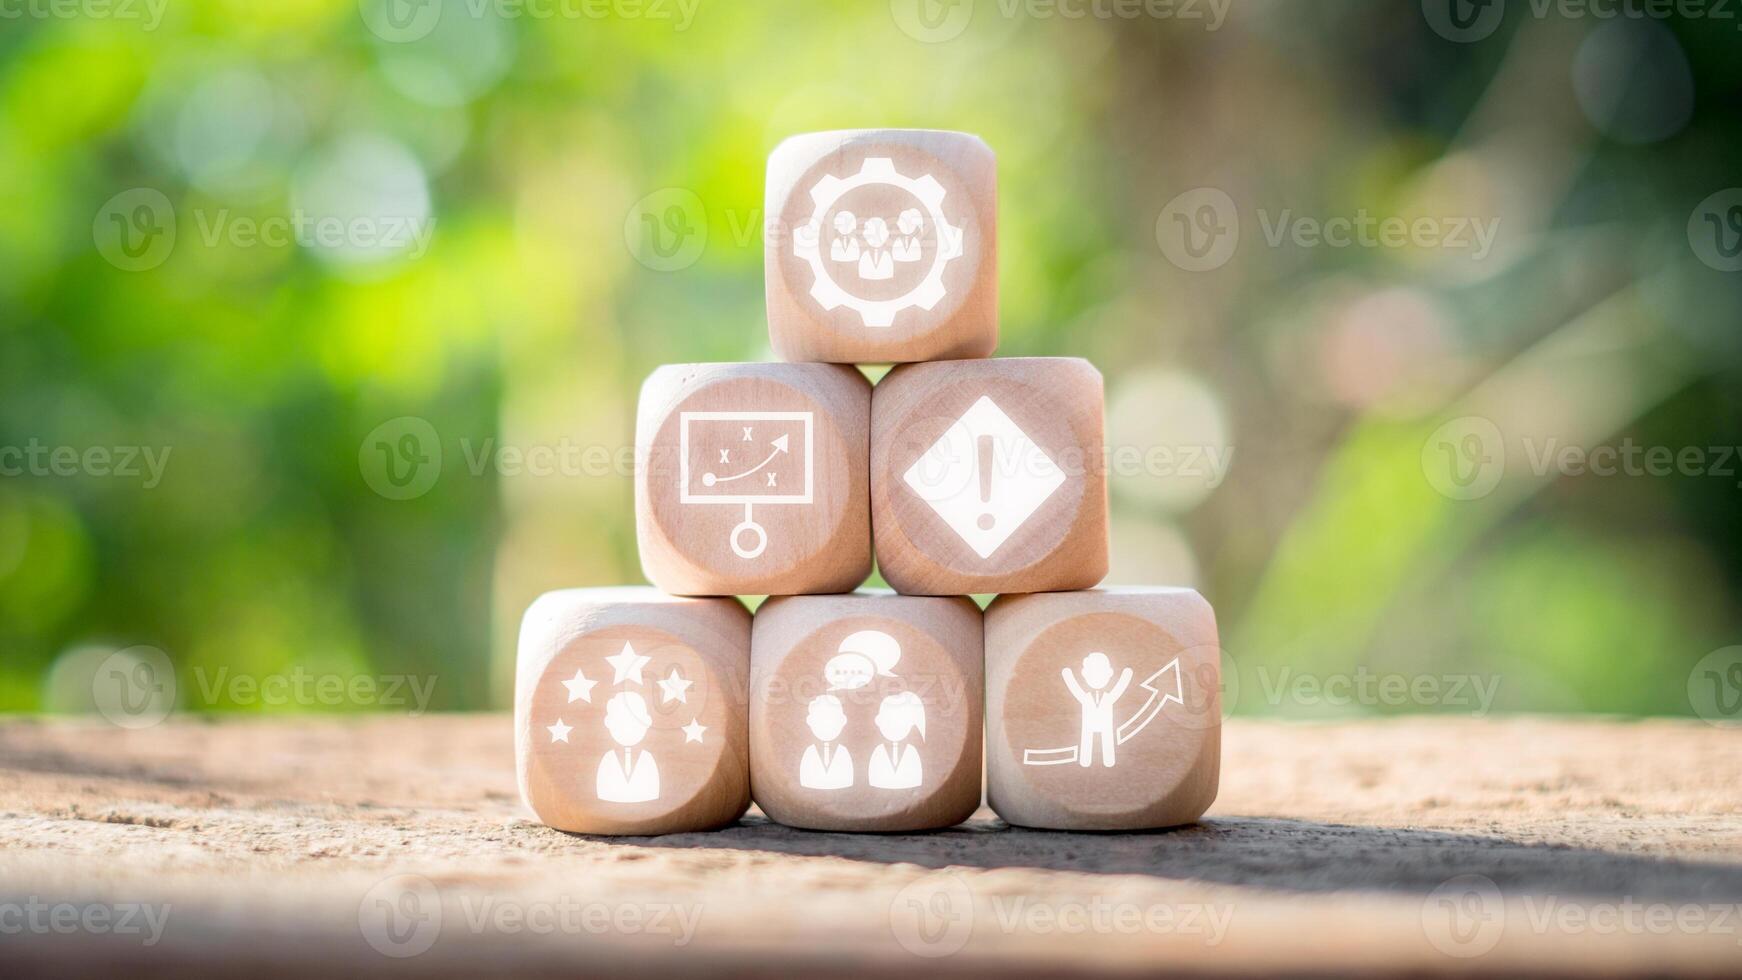 Team building concept, Wooden block on desk with team building icon on virtual screen. Team Spirit, Motivation, Training, Competency, Collaboration, Communication, Goal, Social Relations. photo